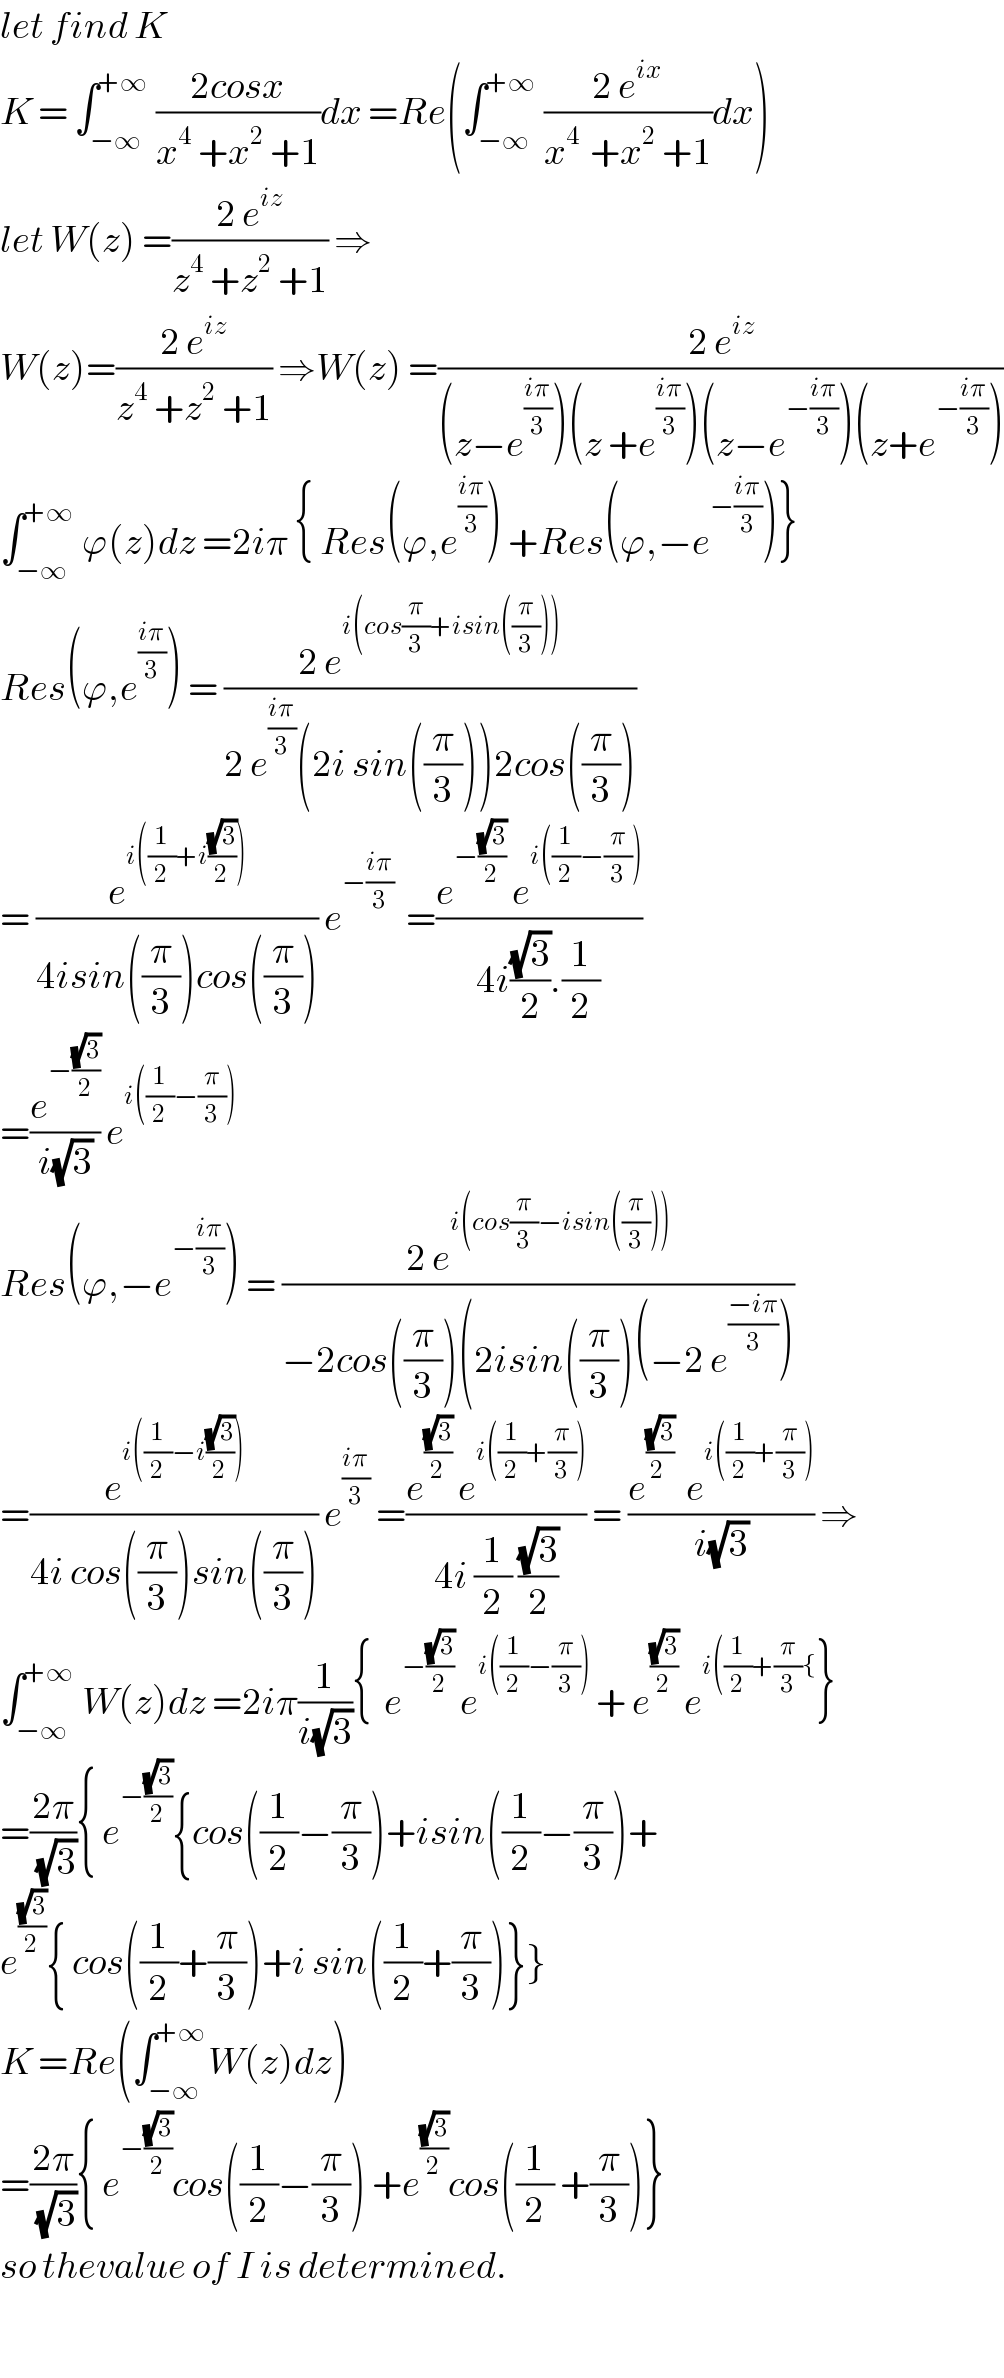 let find K  K = ∫_(−∞) ^(+∞)  ((2cosx)/(x^4  +x^2  +1))dx =Re(∫_(−∞) ^(+∞)  ((2 e^(ix) )/(x^(4 )  +x^2  +1))dx)  let W(z) =((2 e^(iz) )/(z^4  +z^2  +1)) ⇒  W(z)=((2 e^(iz) )/(z^4  +z^2  +1)) ⇒W(z) =((2 e^(iz) )/((z−e^((iπ)/3) )(z +e^((iπ)/3) )(z−e^(−((iπ)/3)) )(z+e^(−((iπ)/3)) )))  ∫_(−∞) ^(+∞)  ϕ(z)dz =2iπ { Res(ϕ,e^((iπ)/3) ) +Res(ϕ,−e^(−((iπ)/3)) )}  Res(ϕ,e^((iπ)/3) ) = ((2 e^(i(cos(π/3)+isin((π/3)))) )/(2 e^((iπ)/3) (2i sin((π/3)))2cos((π/3))))  = (e^(i((1/2)+i((√3)/2))) /(4isin((π/3))cos((π/3)))) e^(−((iπ)/3))   =((e^(−((√3)/2))  e^(i((1/2)−(π/3))) )/(4i((√3)/2).(1/2)))  =(e^(−((√3)/2)) /(i(√3))) e^(i((1/2)−(π/3)))   Res(ϕ,−e^(−((iπ)/3)) ) = ((2 e^(i(cos(π/3)−isin((π/3)))) )/(−2cos((π/3))(2isin((π/3))(−2 e^((−iπ)/3) )))  =(e^(i((1/2)−i((√3)/2))) /(4i cos((π/3))sin((π/3)))) e^((iπ)/3)  =((e^((√3)/2)  e^(i((1/2)+(π/3))) )/(4i (1/2) ((√3)/2))) = ((e^((√3)/(2 ))   e^(i((1/2)+(π/3))) )/(i(√3))) ⇒  ∫_(−∞) ^(+∞)  W(z)dz =2iπ(1/(i(√3))){  e^(−((√3)/2))  e^(i((1/2)−(π/3)))  + e^((√3)/2)  e^(i((1/2)+(π/3){) }  =((2π)/(√3)){ e^(−((√3)/2)) {cos((1/2)−(π/3))+isin((1/2)−(π/3))+  e^((√3)/2) { cos((1/2)+(π/3))+i sin((1/2)+(π/3))}}  K =Re(∫_(−∞) ^(+∞) W(z)dz)  =((2π)/(√3)){ e^(−((√3)/2)) cos((1/2)−(π/3)) +e^((√3)/2) cos((1/2) +(π/3))}  so thevalue of I is determined.    